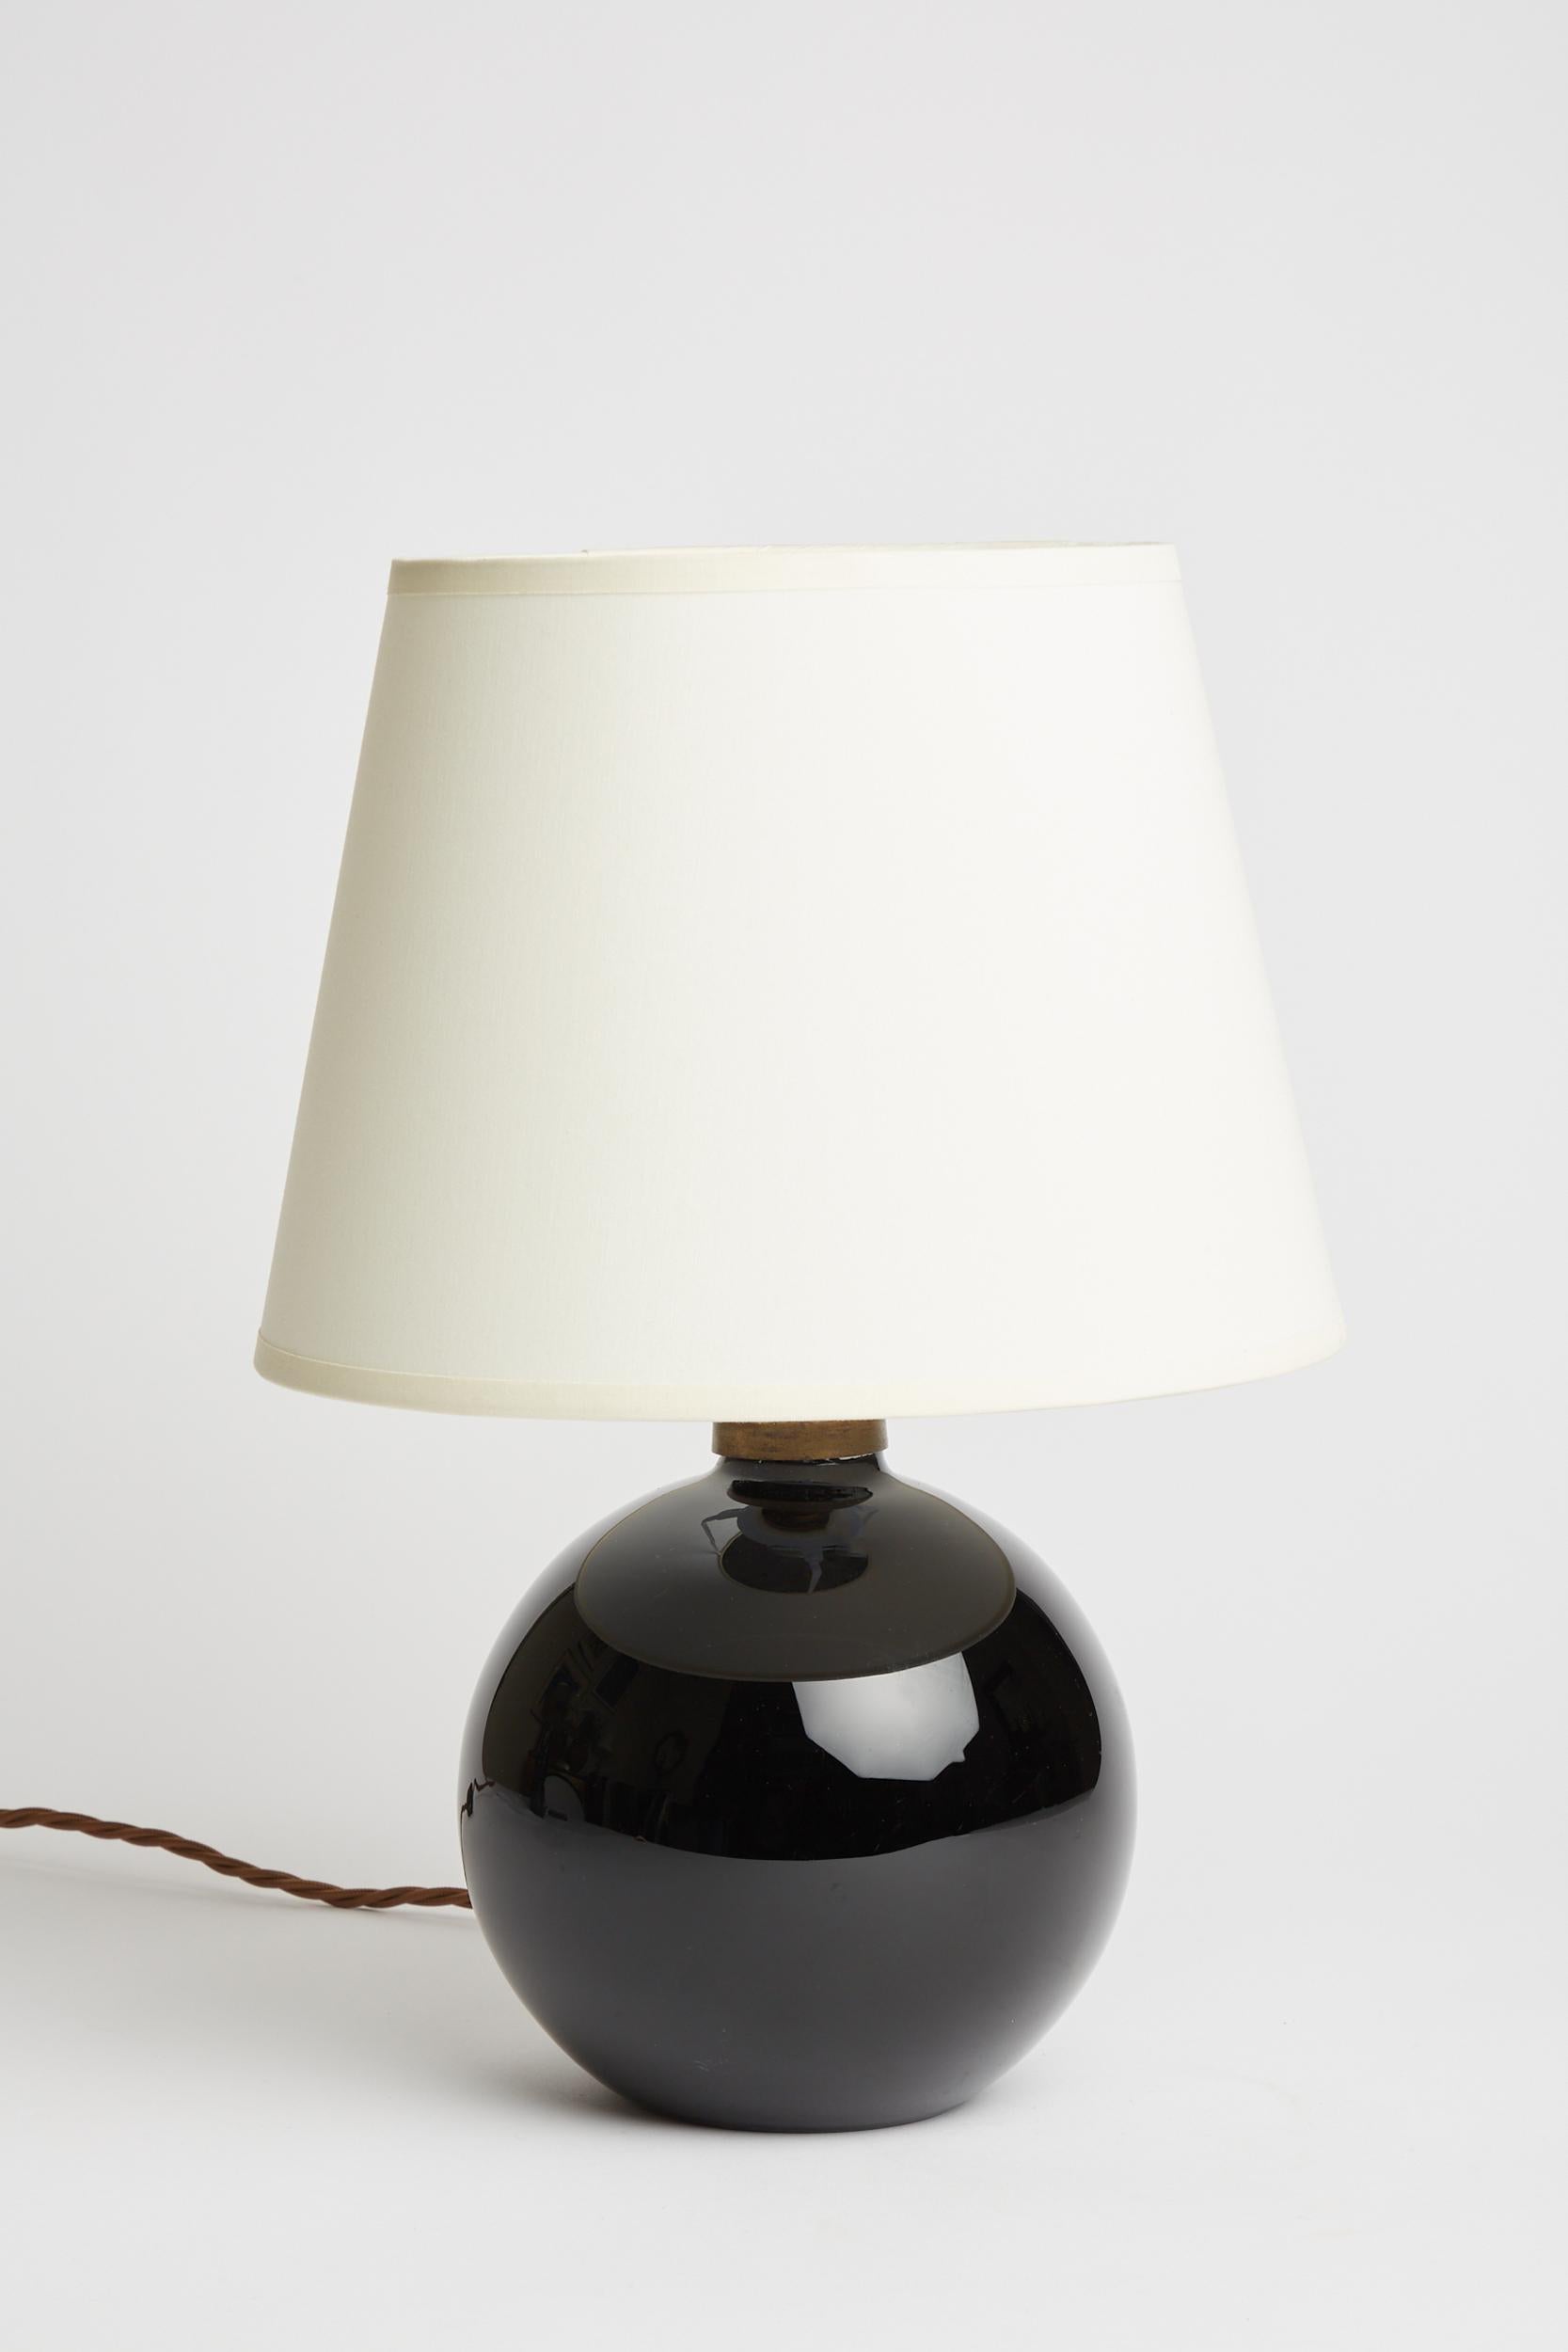 A black opaline glass table lamp by Jacques Adnet (1900-1984).
France, Circa 1930.
With the shade: 36 cm high by 25 cm diameter.
Lamp base only: 22 cm high ny 16 cm diameter.